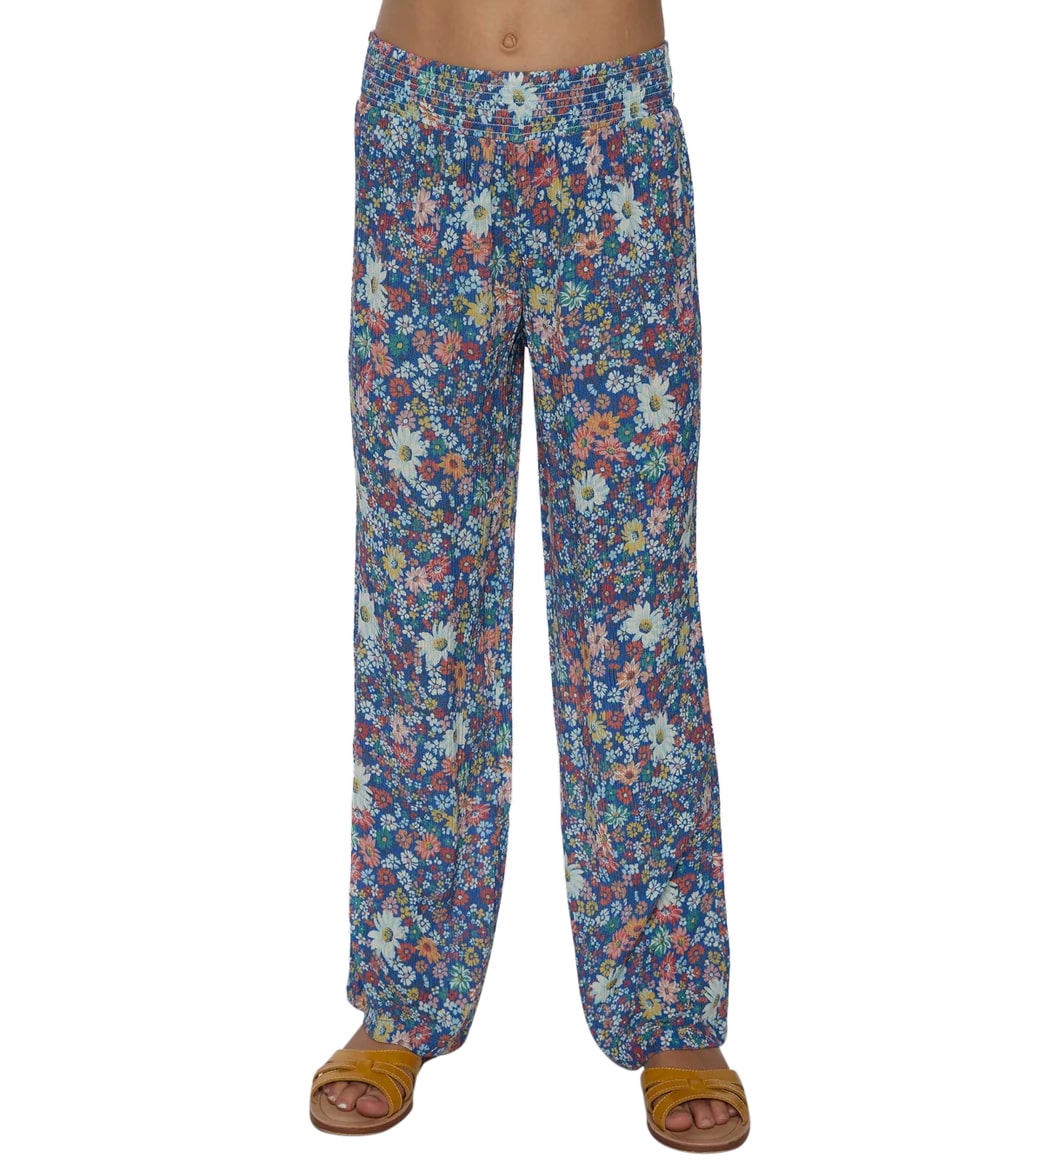 O'neill Girls' Tommie Pants - Multi Colored Large - Swimoutlet.com